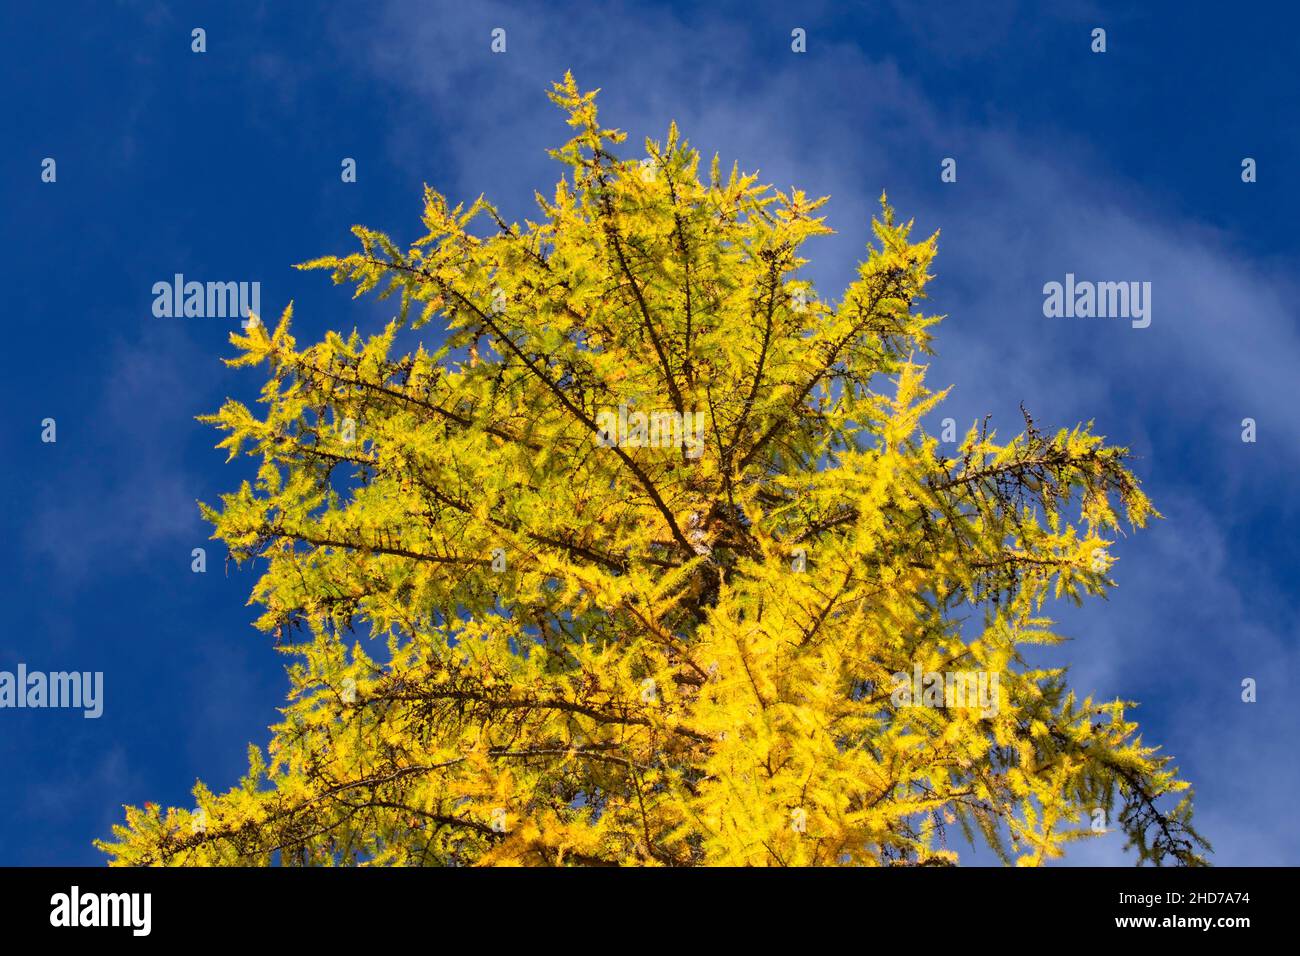 Larch in autumn, Metolius Wild and Scenic River, Deschutes National Forest, Oregon. Stock Photo